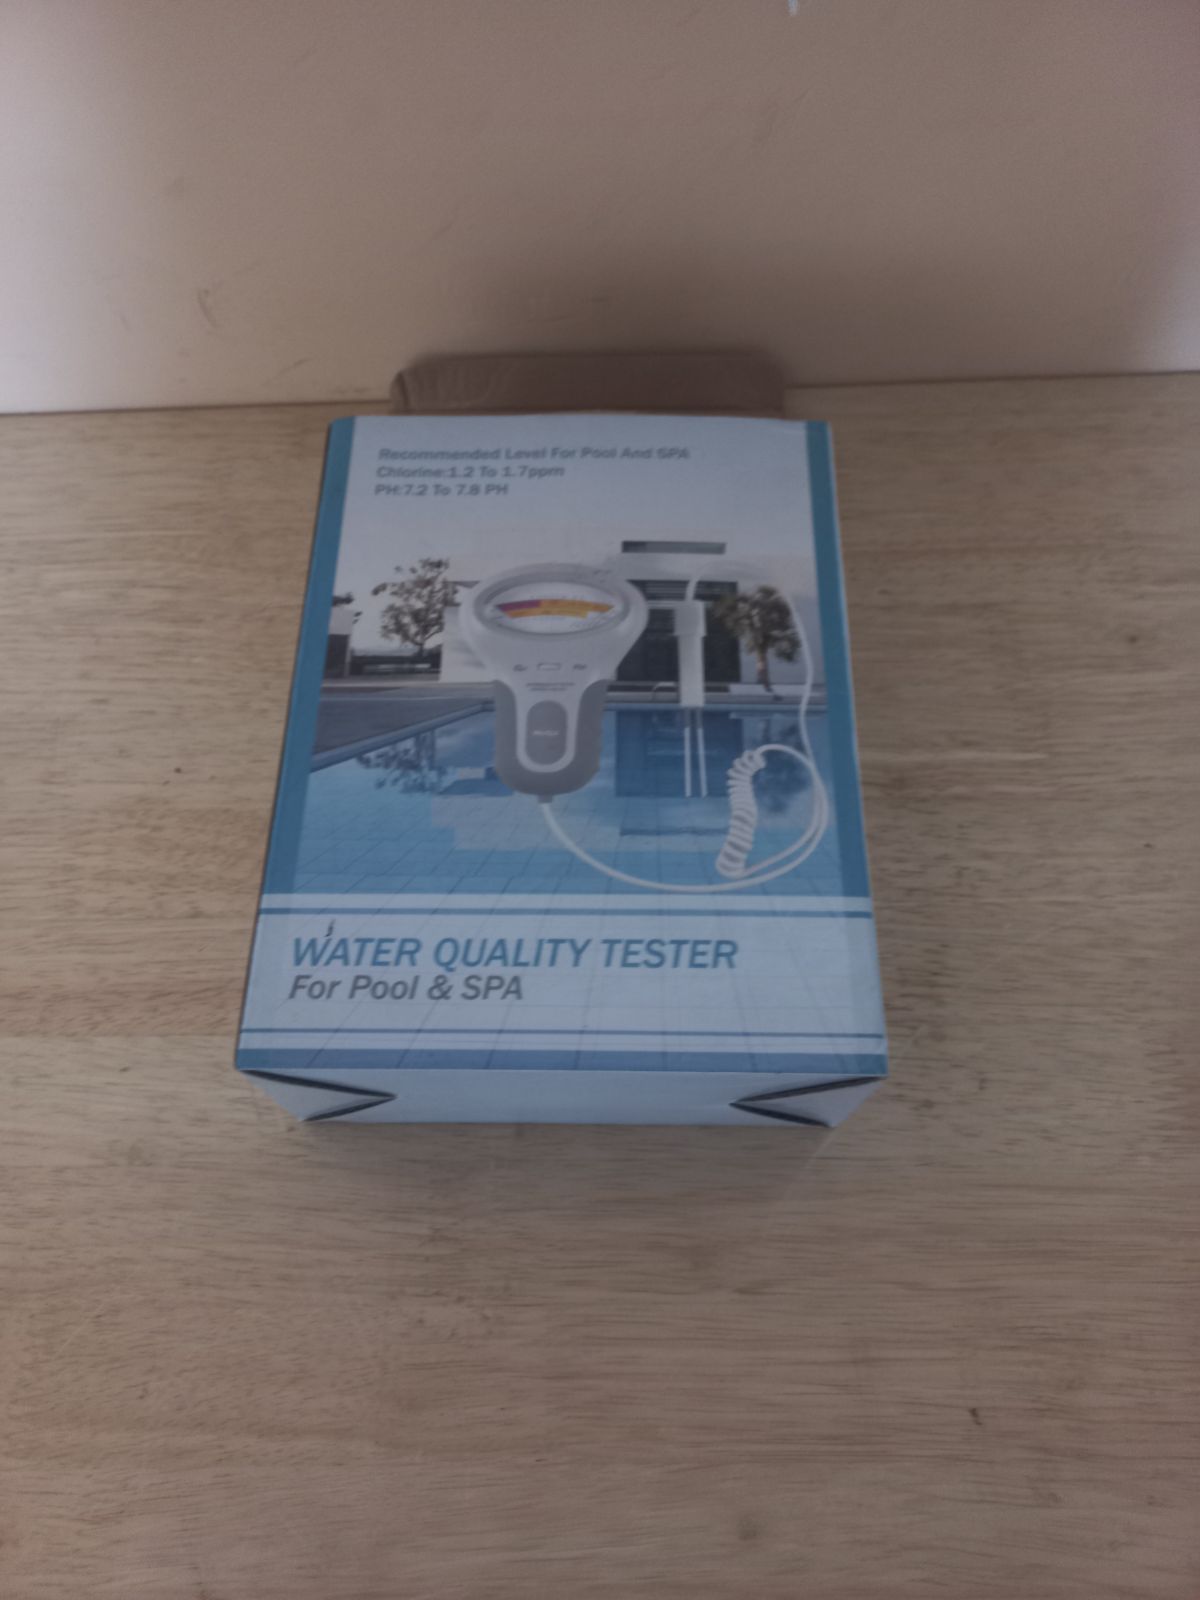 TopHomer Water Quality Tester